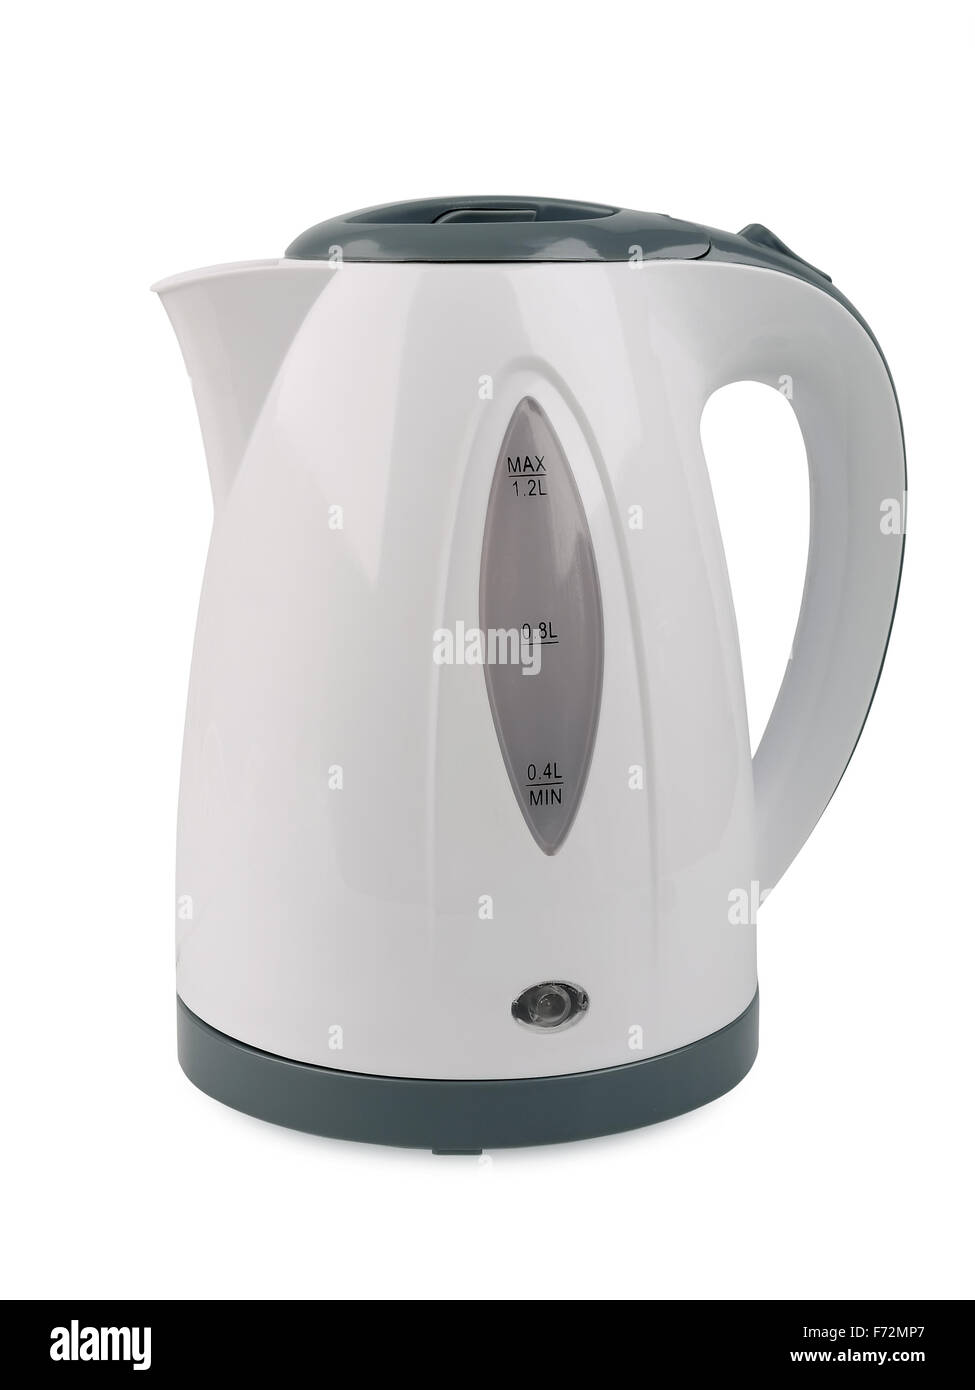 https://c8.alamy.com/comp/F72MP7/electric-kettle-isolated-on-white-background-F72MP7.jpg